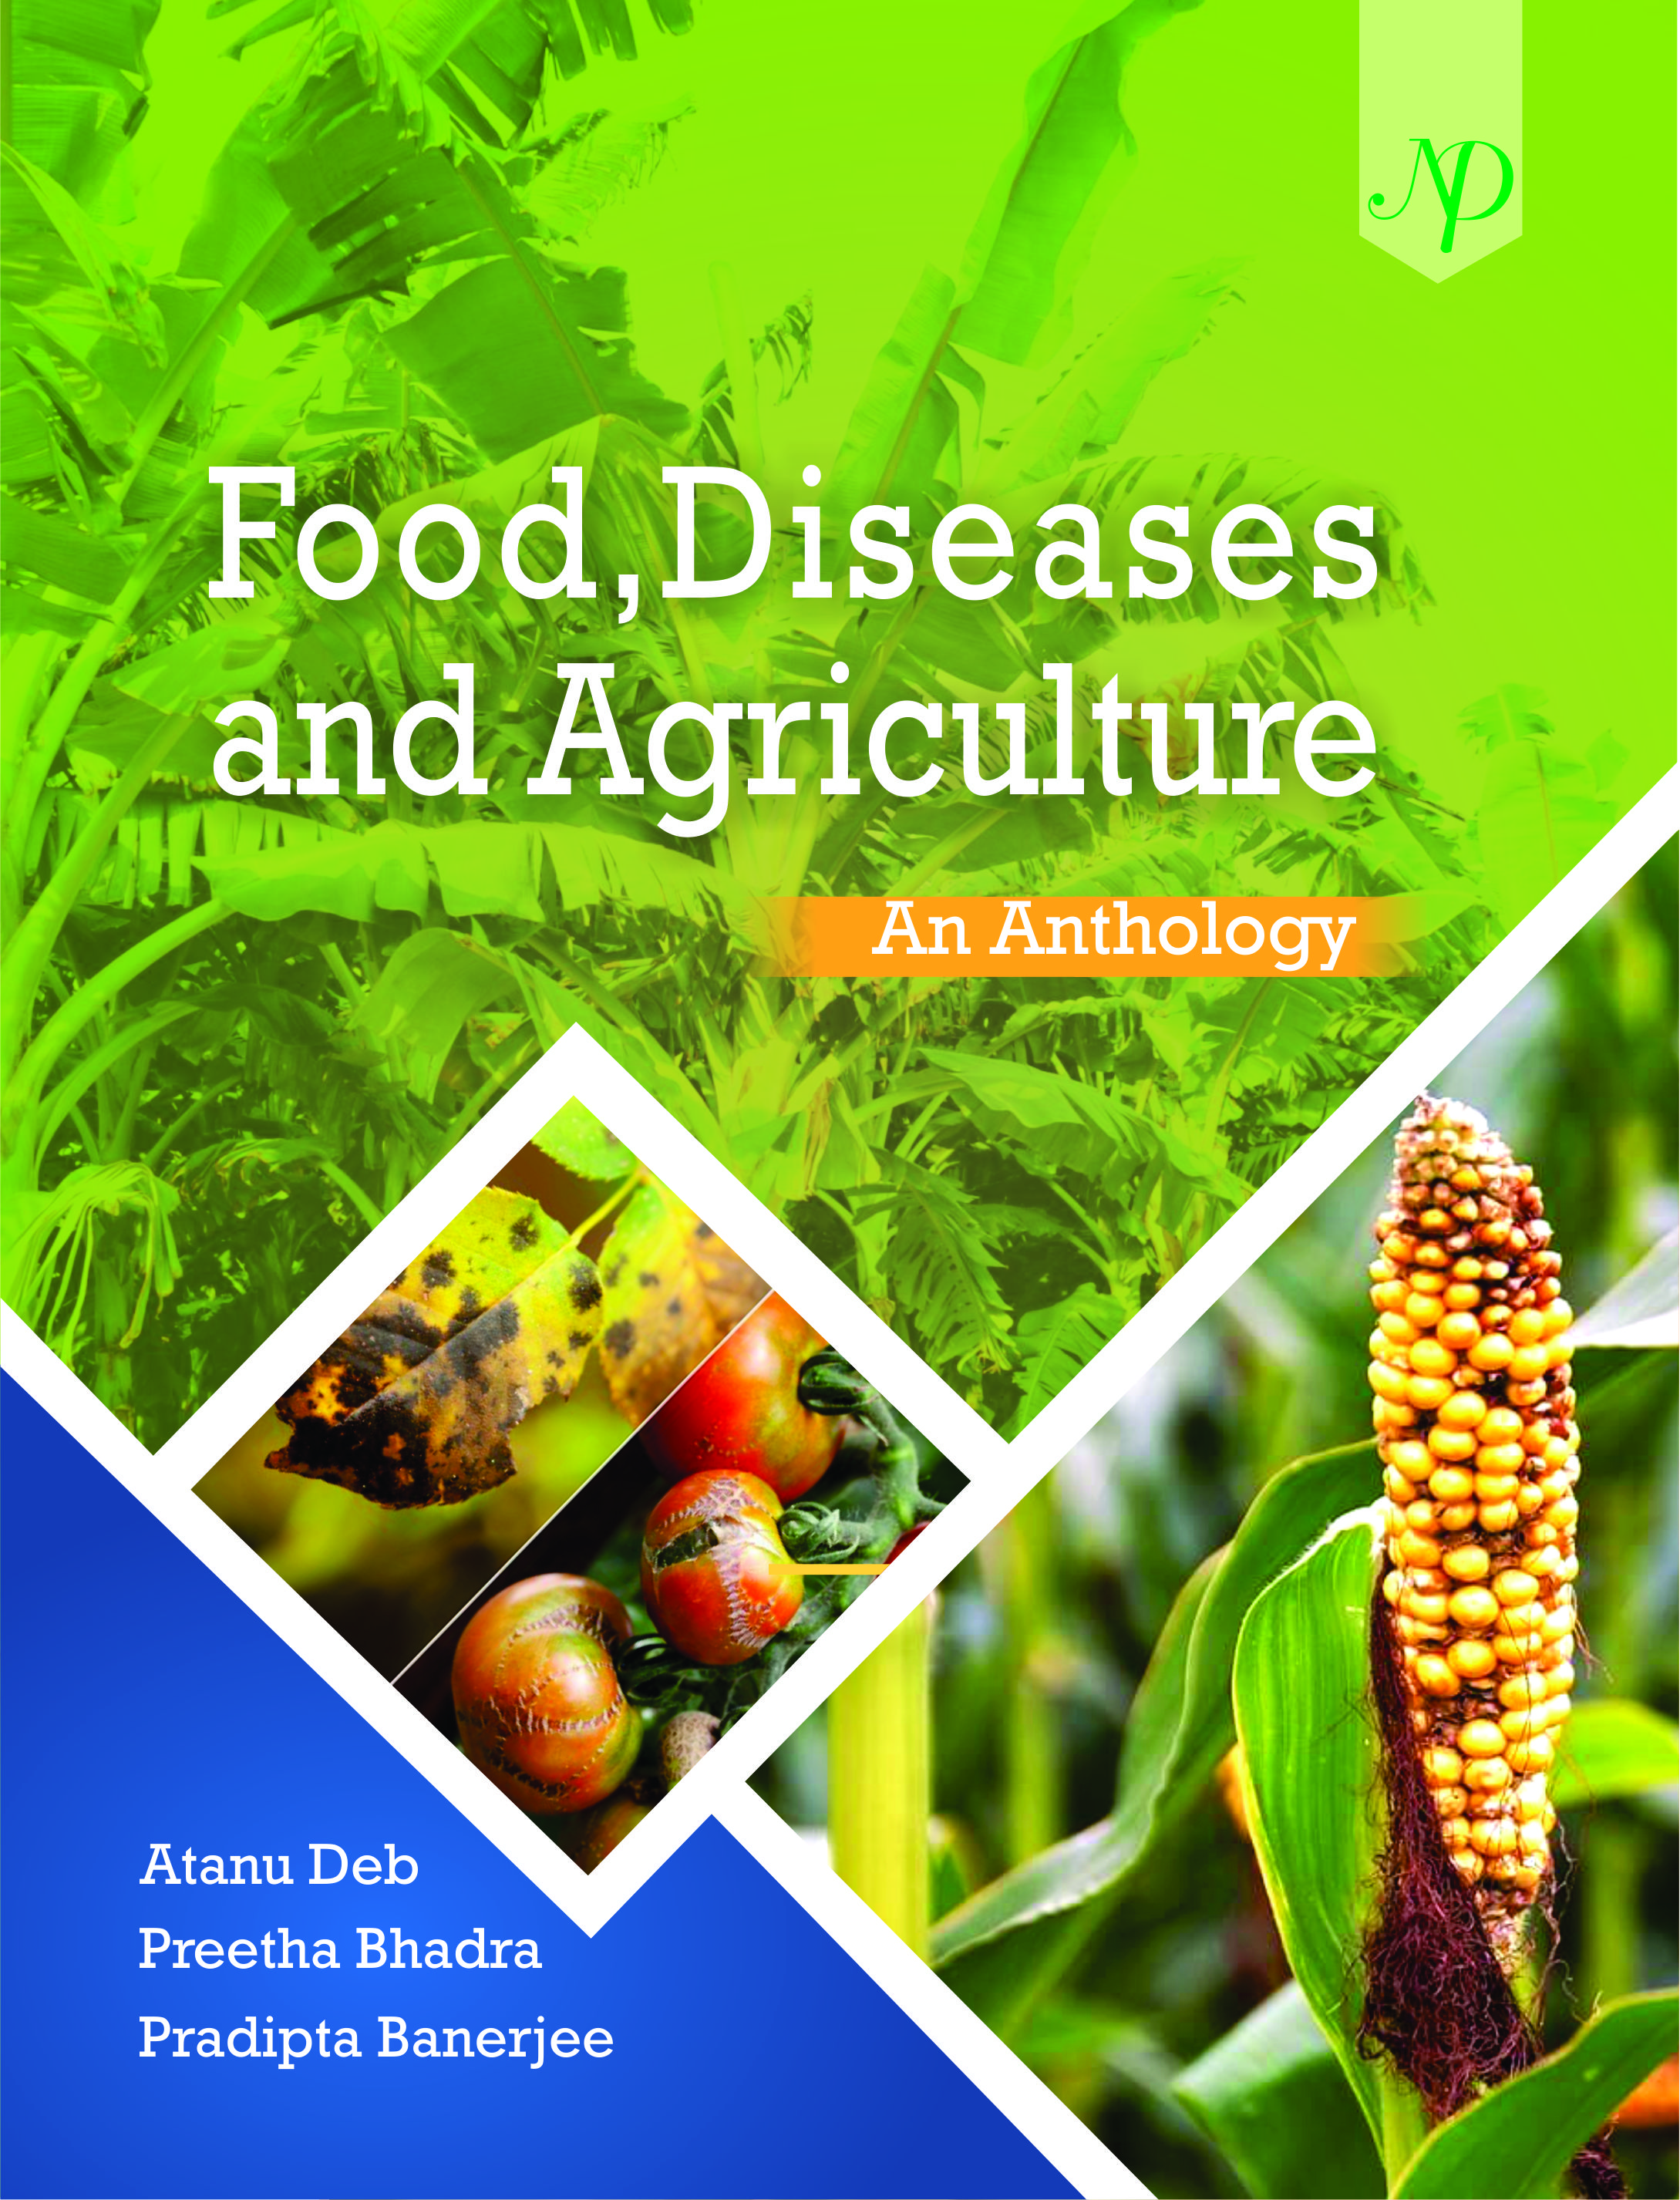 Food,Diseases and Agriculture - An AnthologyCover.jpg